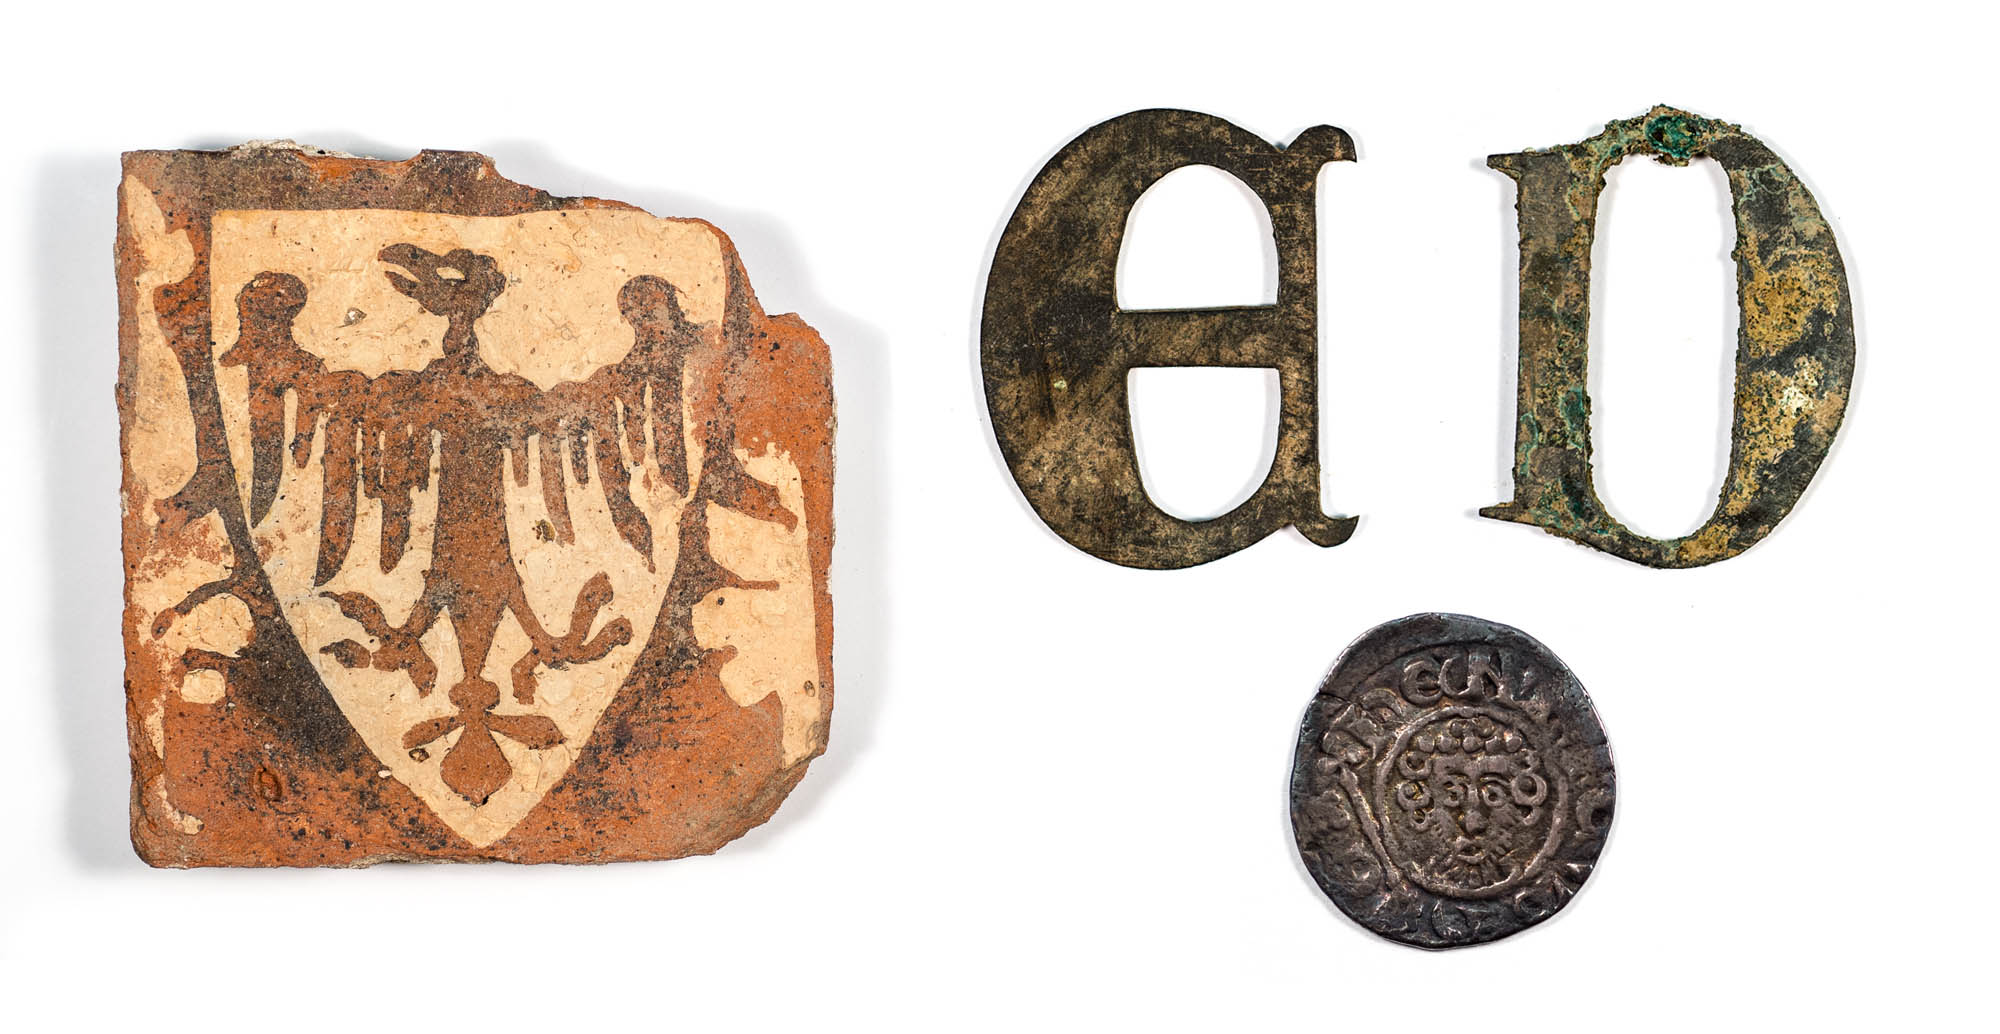 A selection of artefacts found during the excavation of the Grey Friars church: inlaid floor tile, tomb lettering and a coin - See artefacts like this at Leicester Guildhall